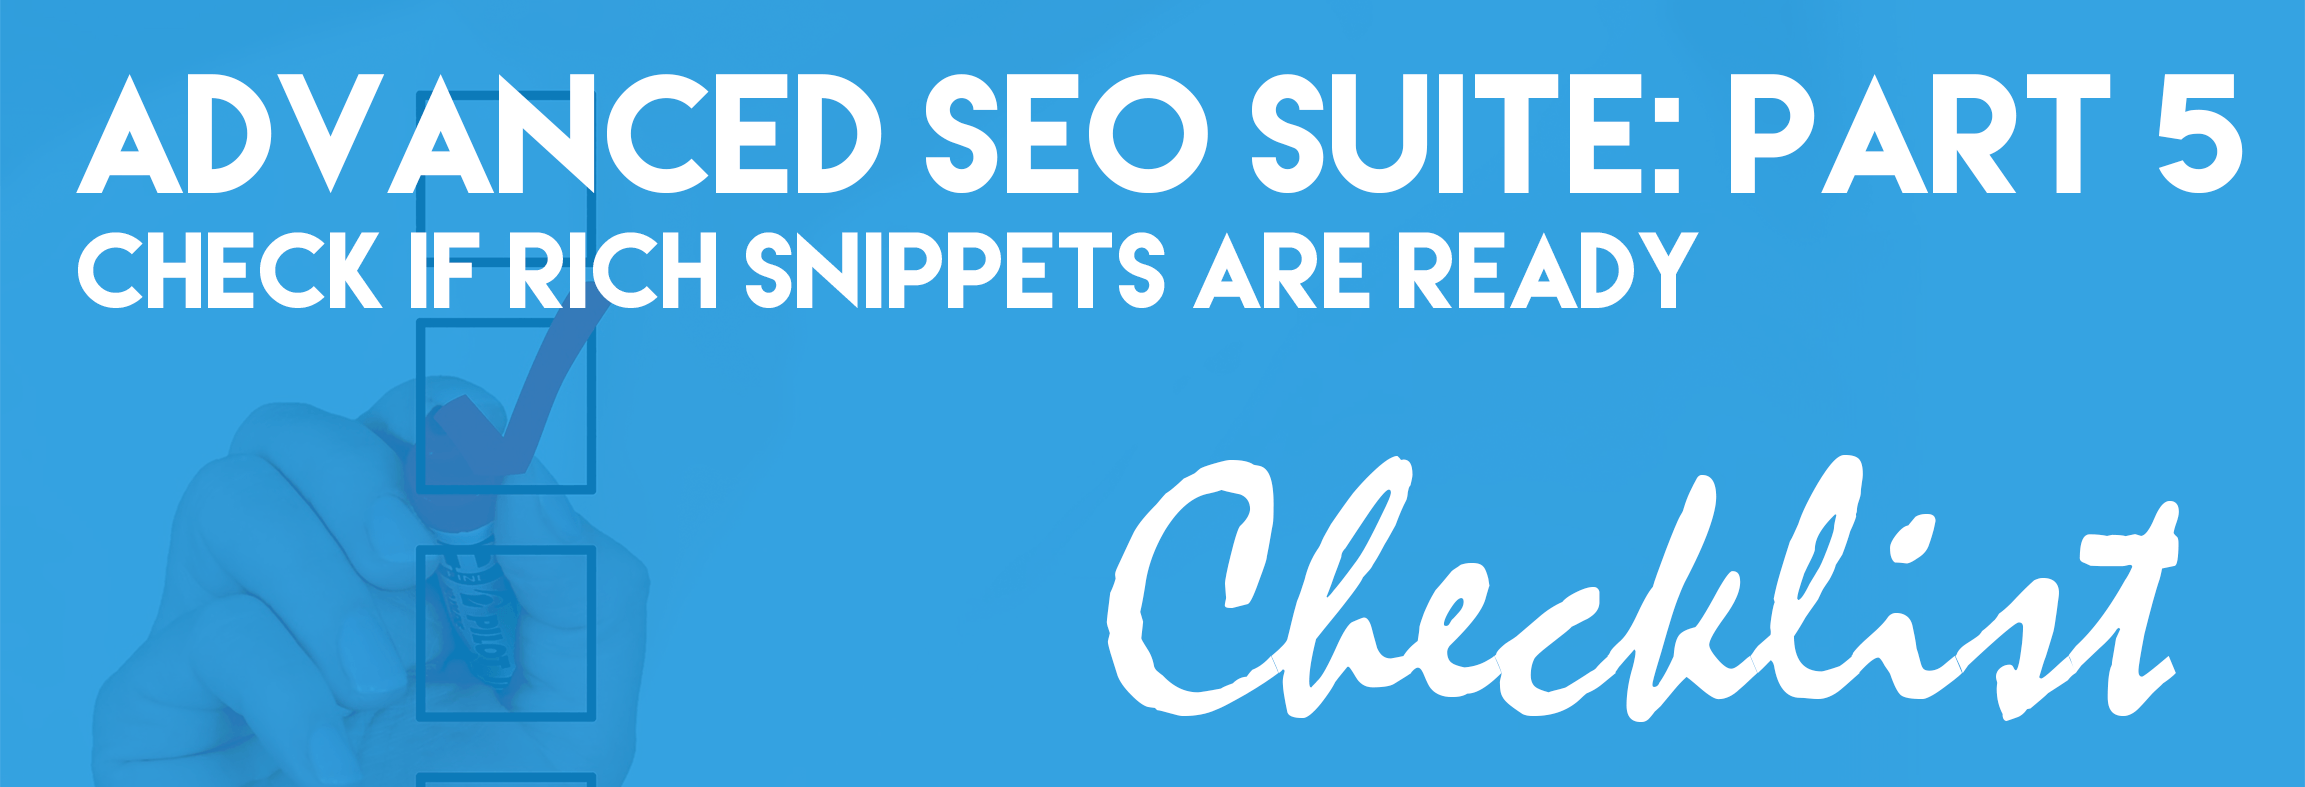 Advanced SEO Suite Onboarding Checklist (Part 5): Check If Rich Snippets Are Ready